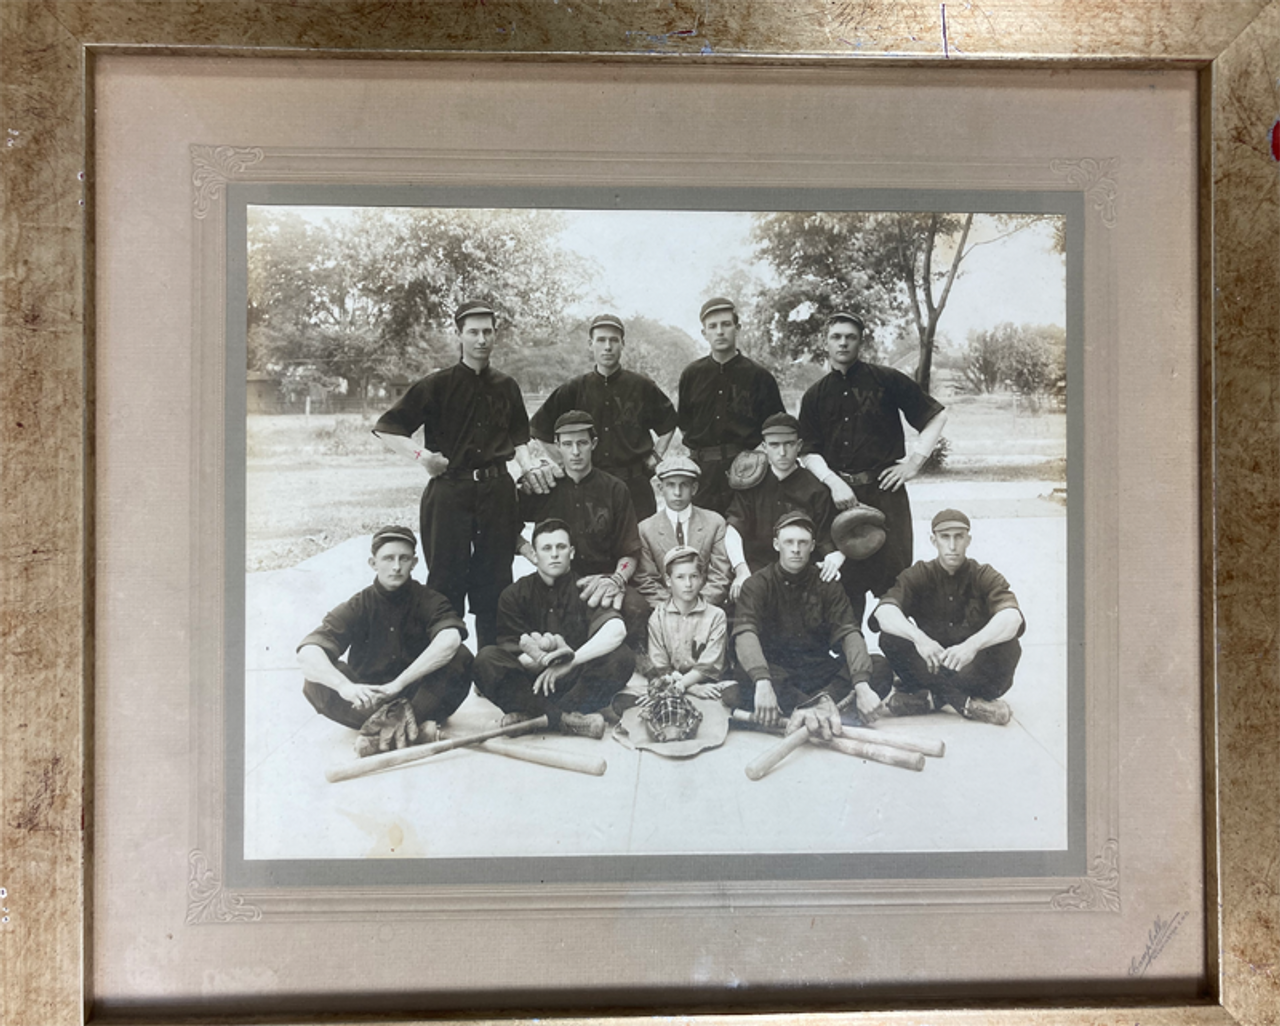 antique silver nitrate photograph of American baseball team framed